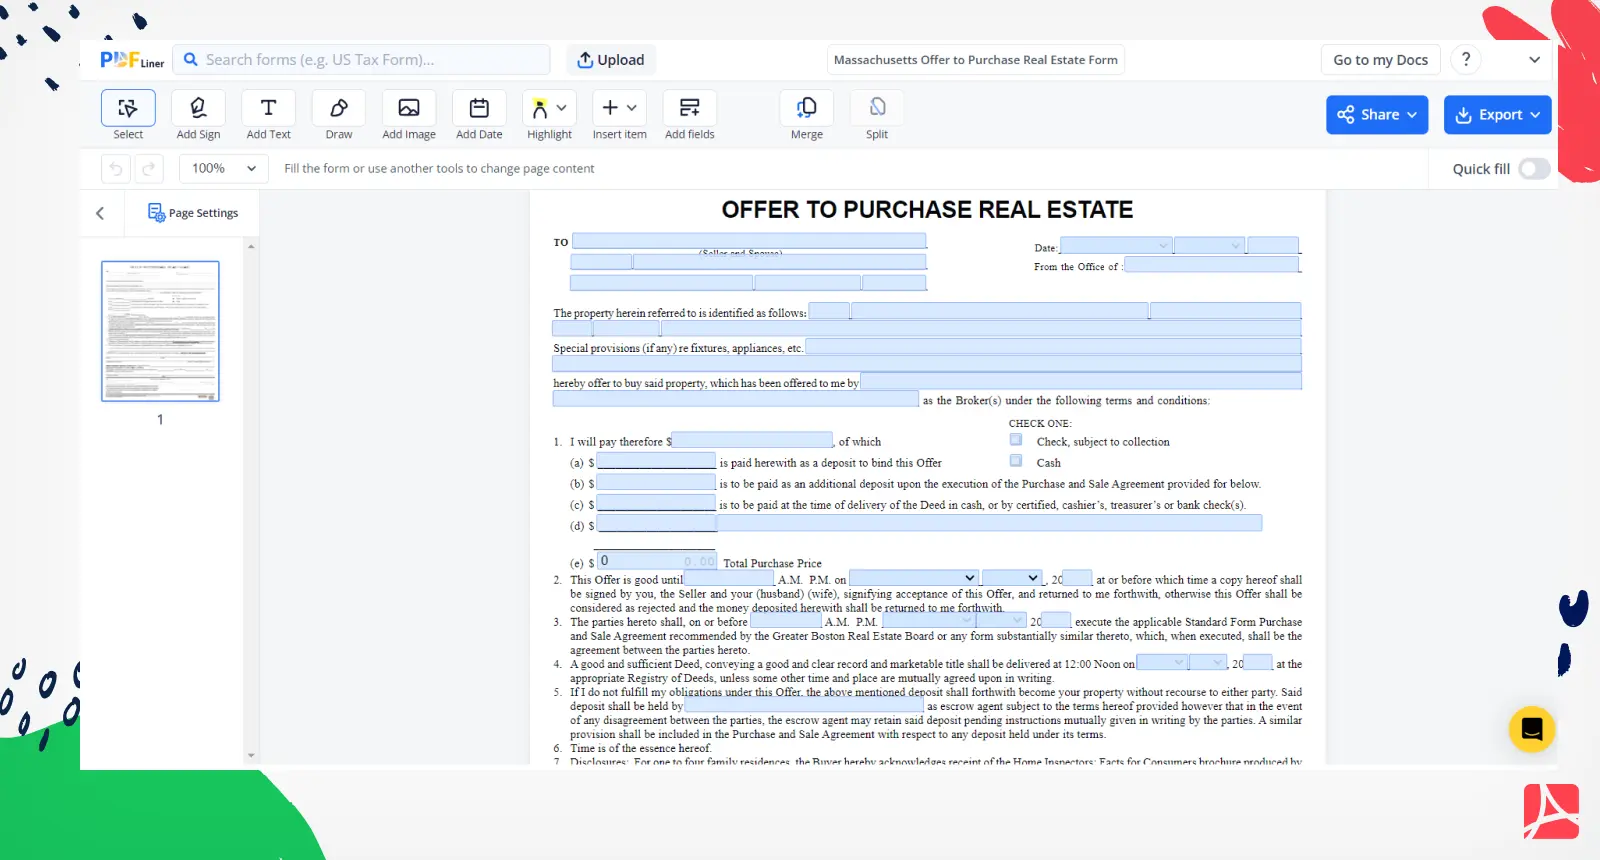 Massachusetts Offer to Purchase Real Estate Form Screenshot